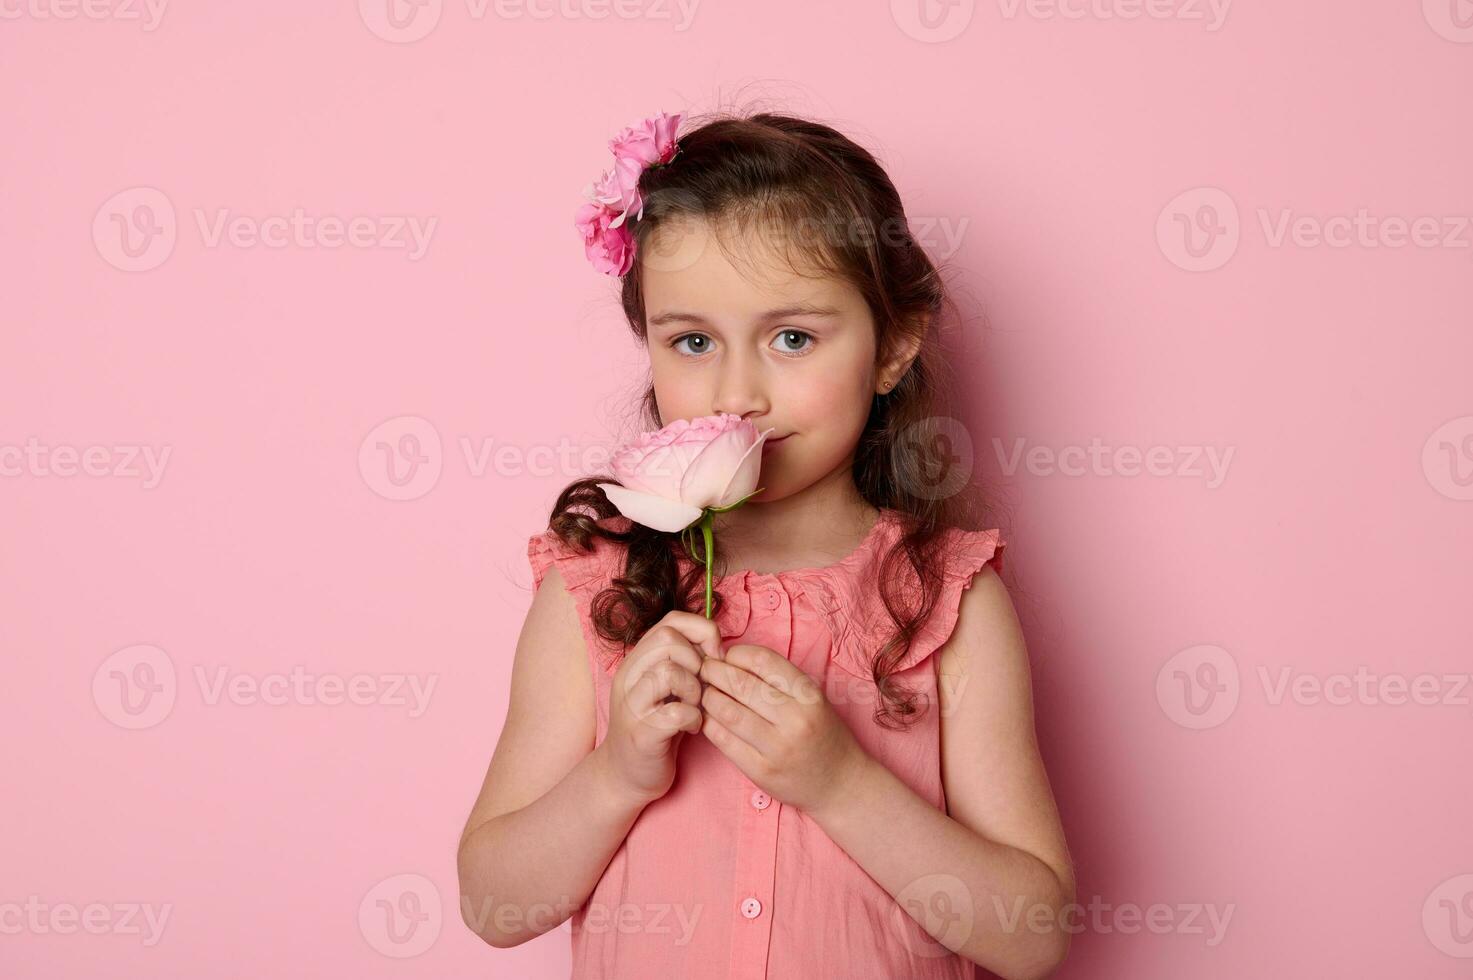 Portrait of a noble charming baby girl in pink dress and flowers in hairstyle, enjoying the smell of pink rose flower photo